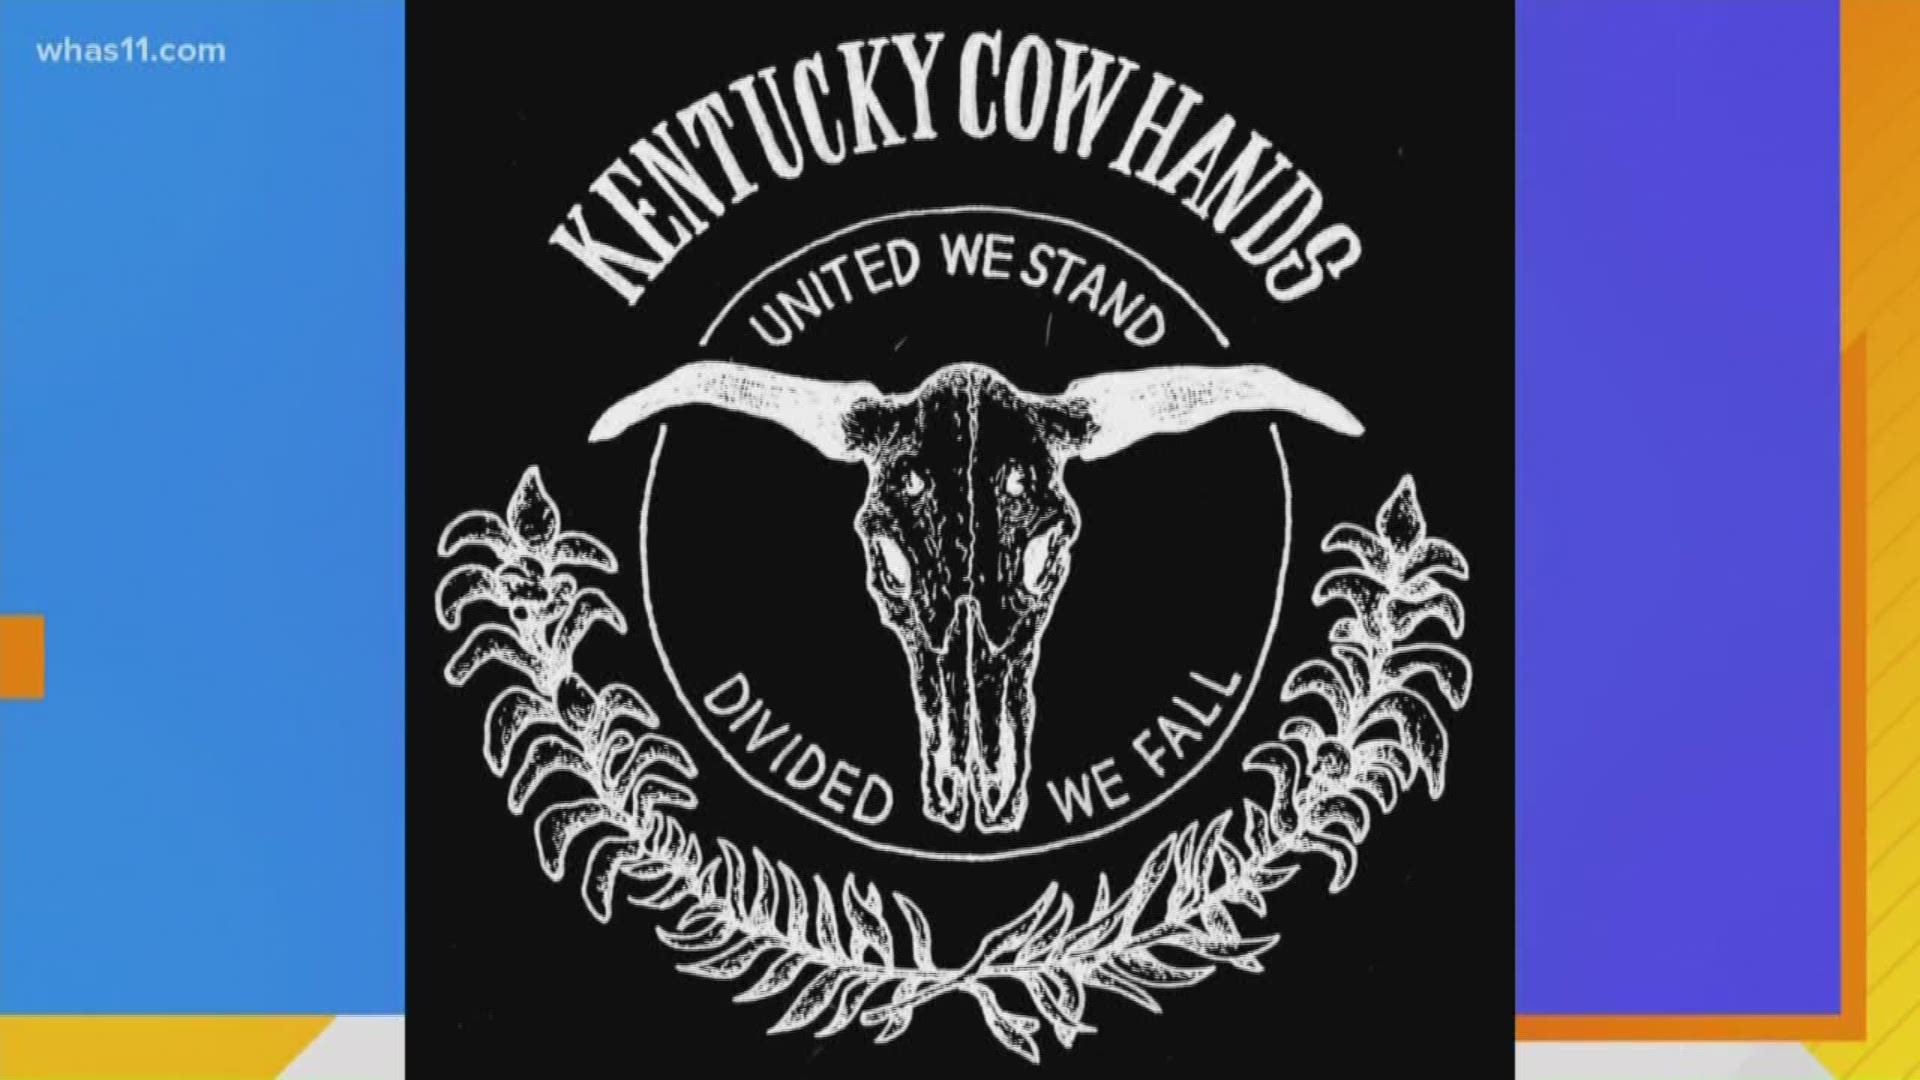 The Kentucky Cowhands perform at Mag bar on March 12 and at their album release party March 27 at Nachbar.  Follow the band at KentuckyCowhands.com and social media.